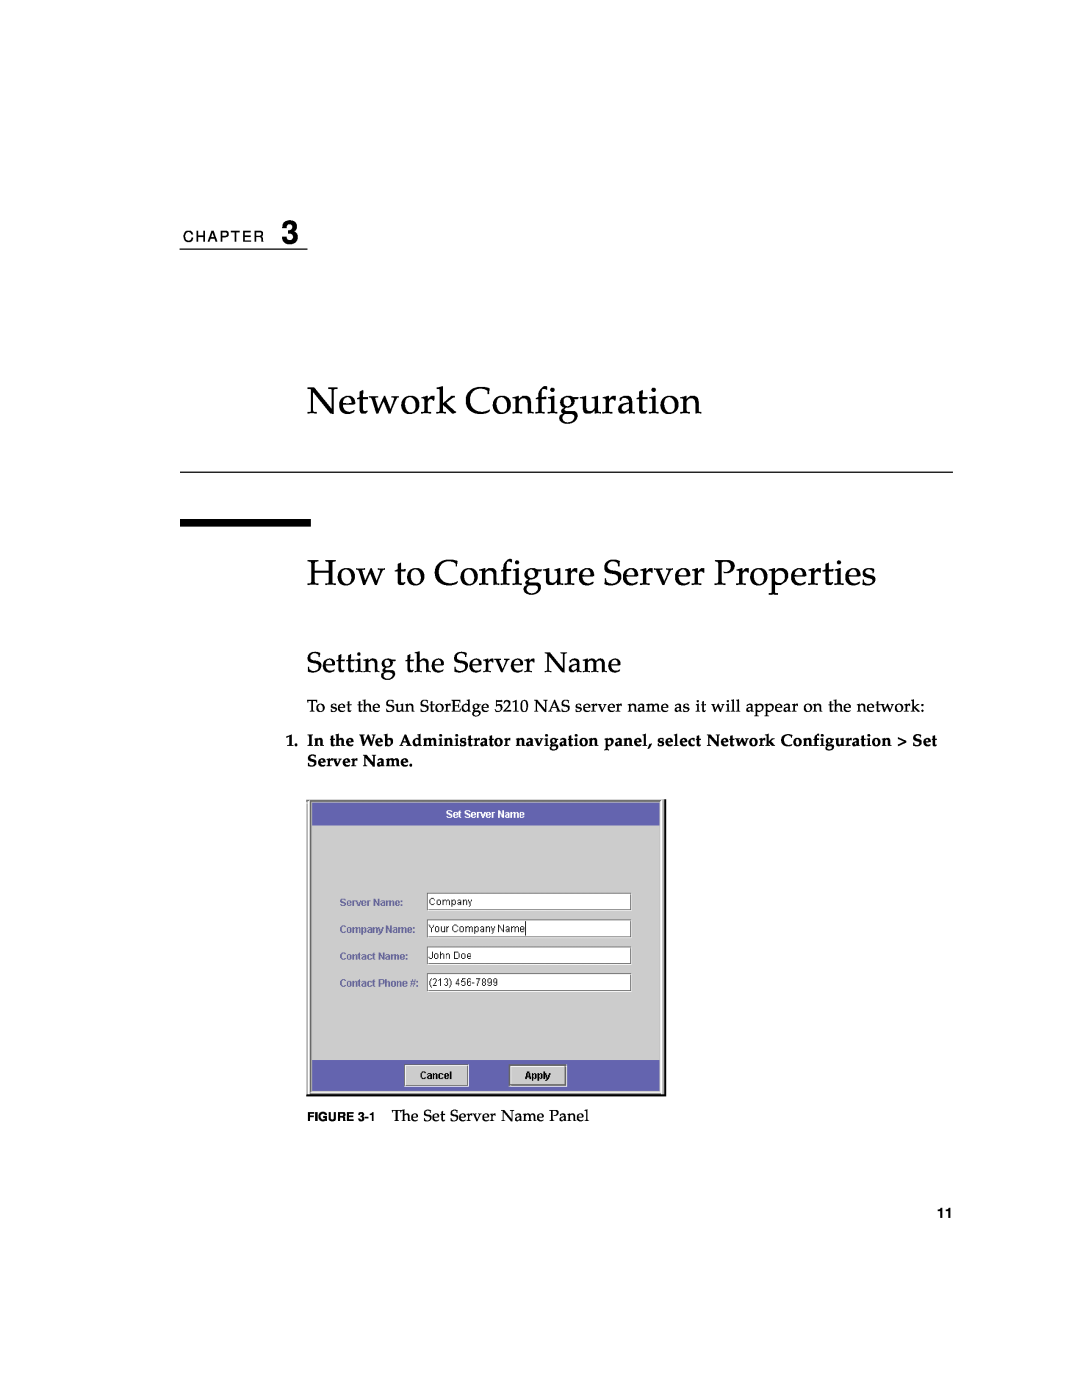 Sun Microsystems 5210 NAS manual Network Configuration, How to Configure Server Properties, Setting the Server Name 